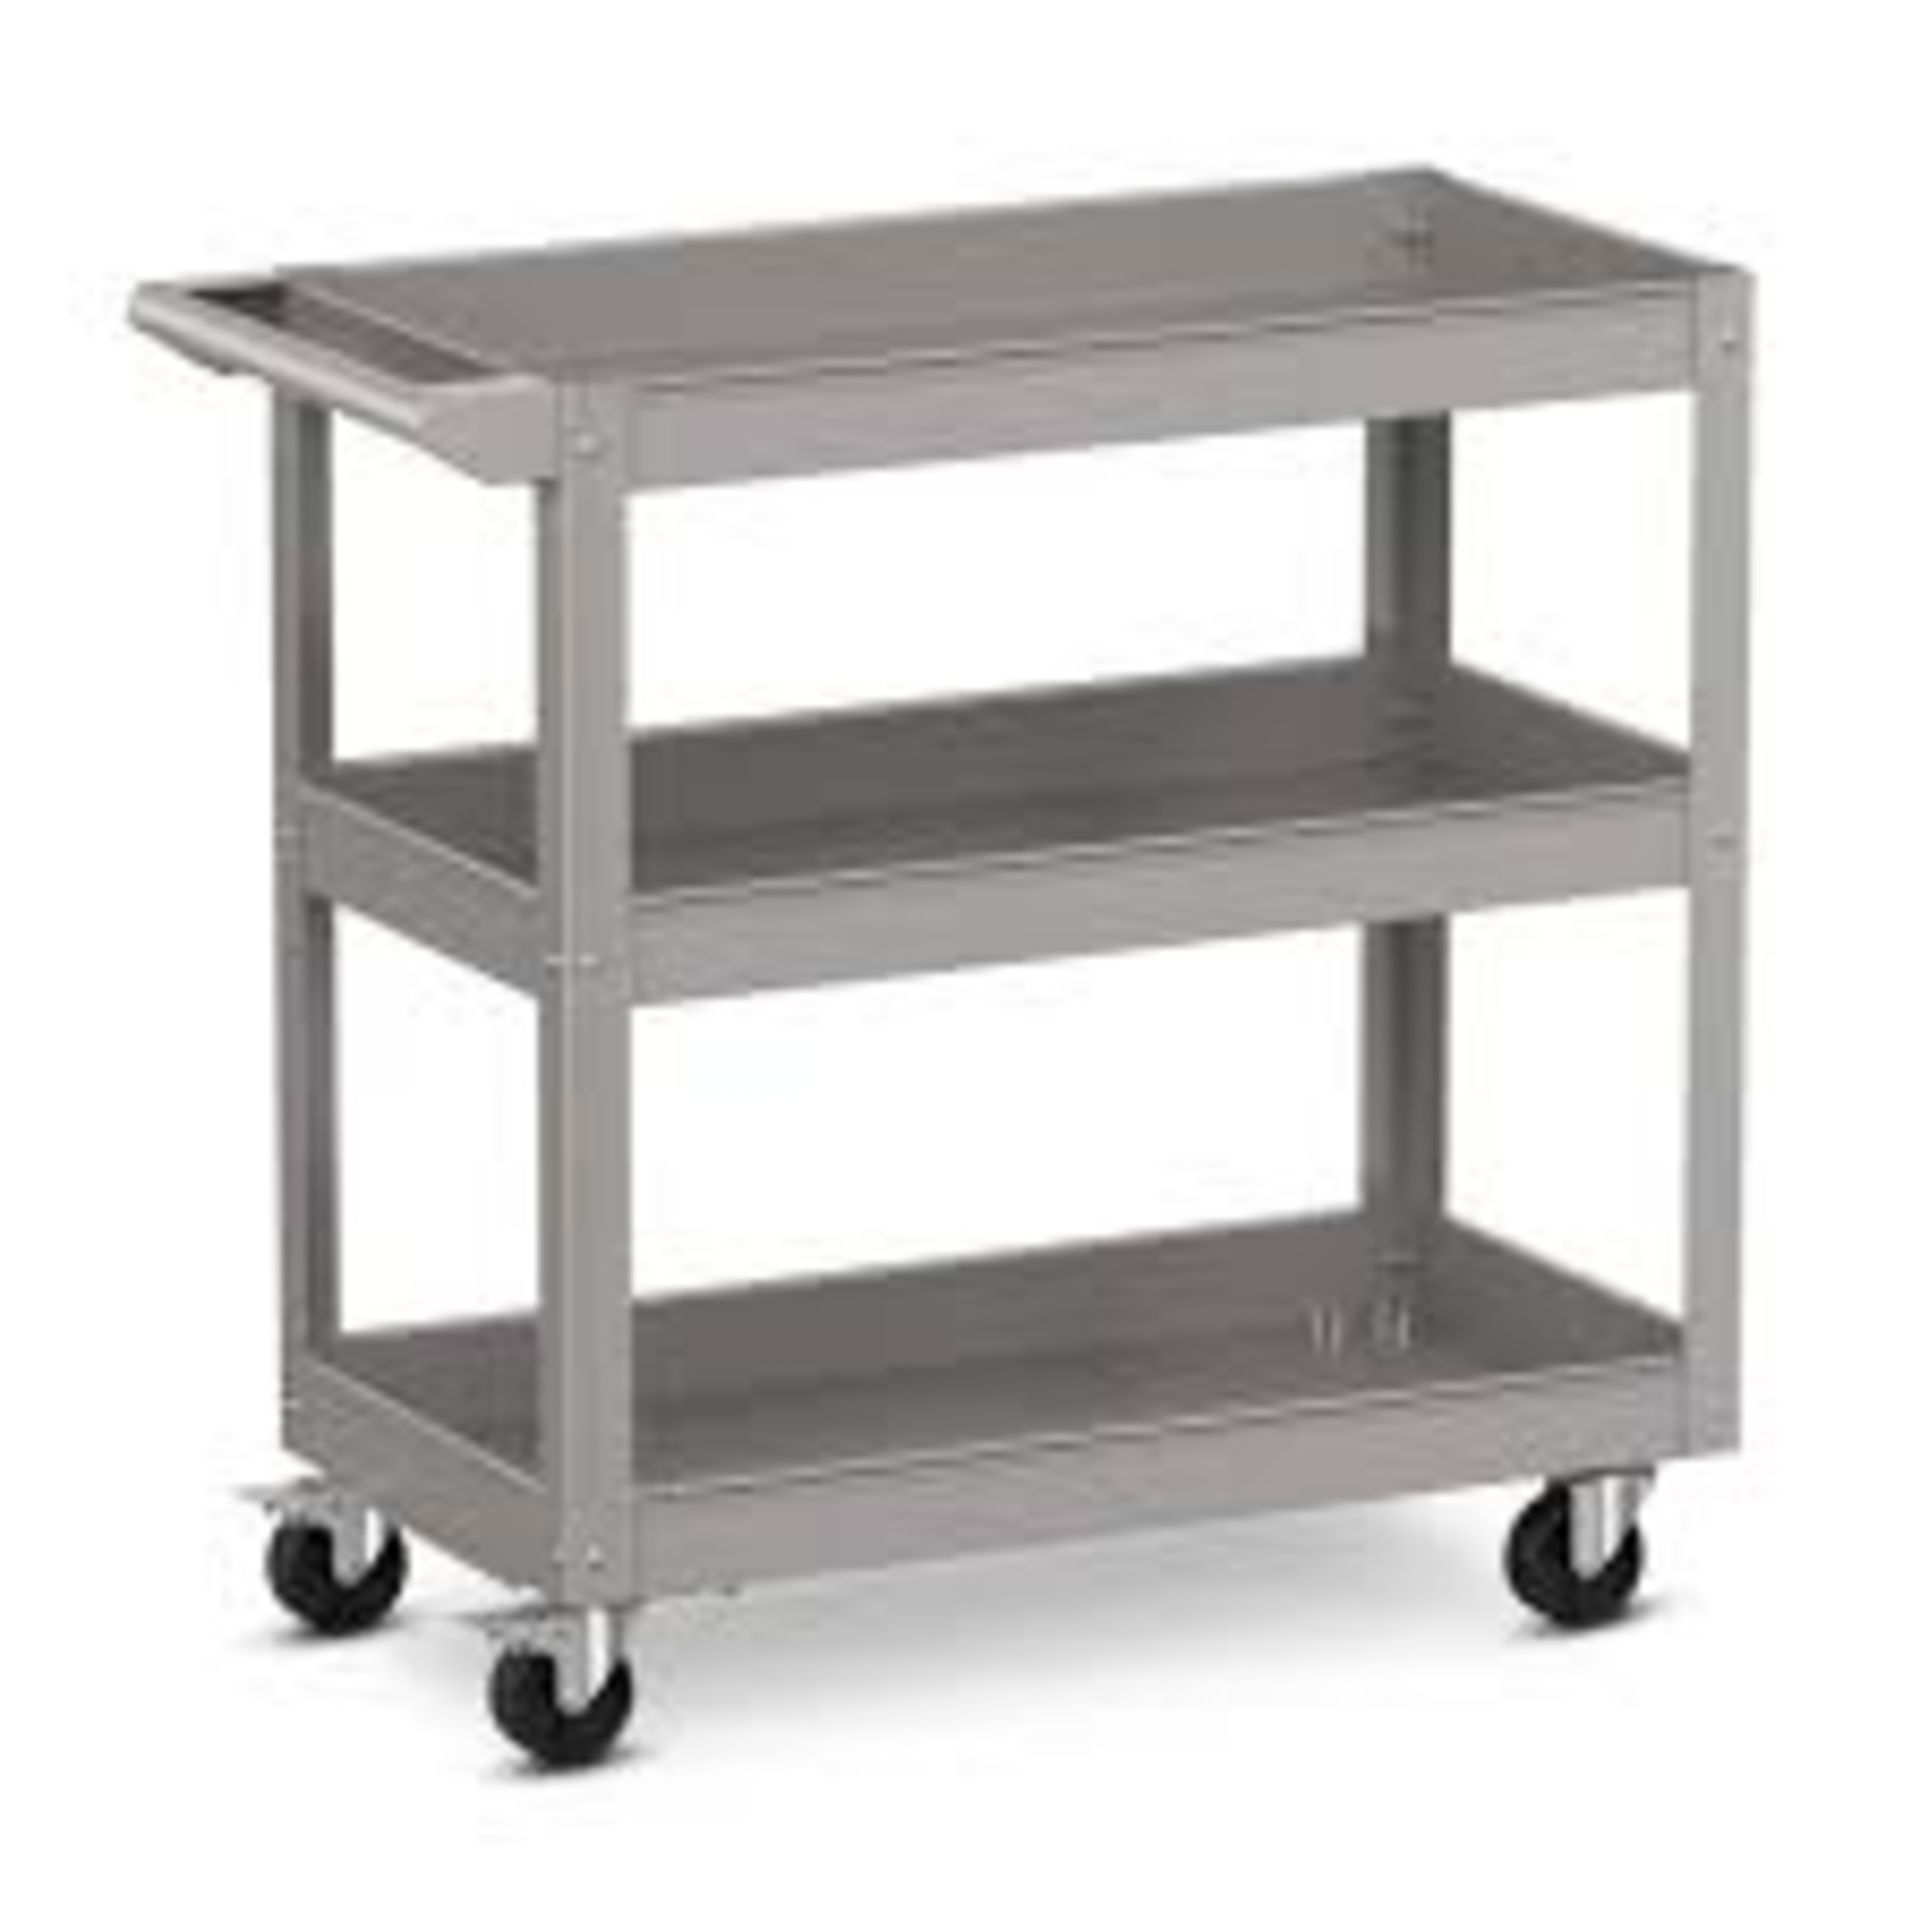 3-Tier Tool Trolley with Handle and Lockable Wheels. - R14.6. Want to keep your room organized? Come